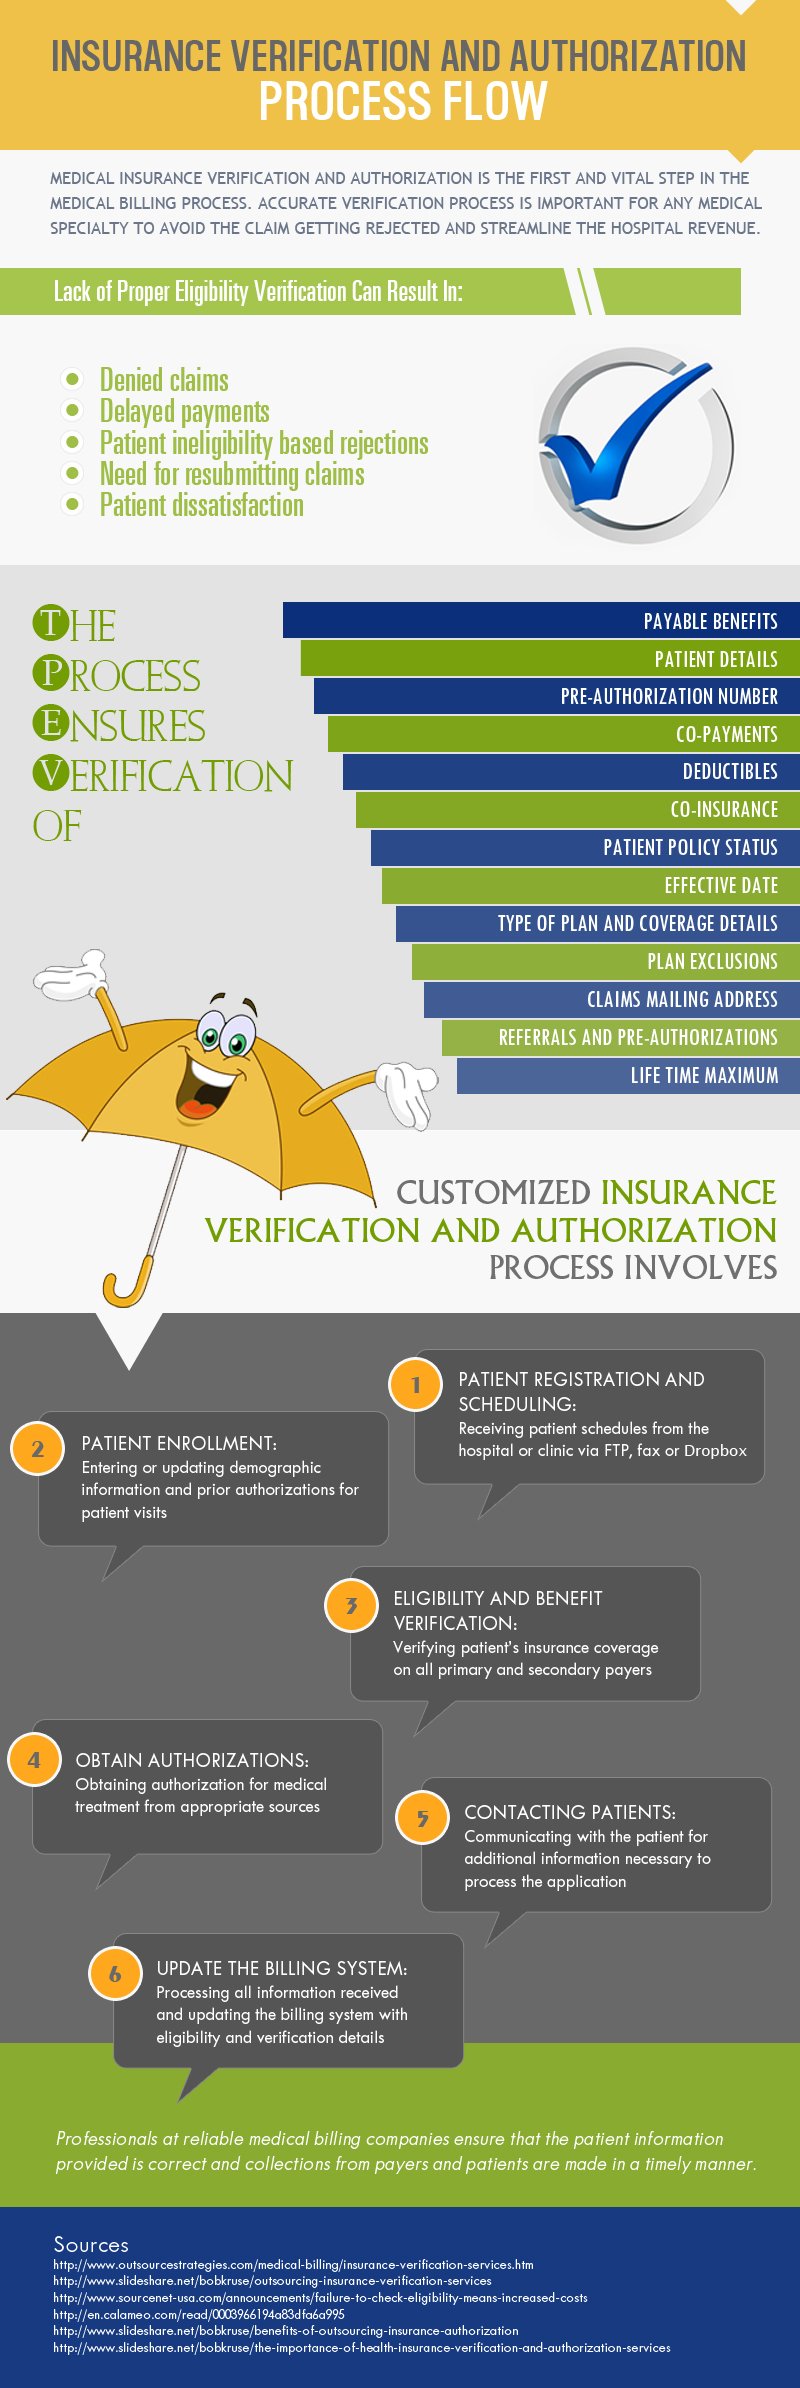 Insurance Verifications and Authorizations